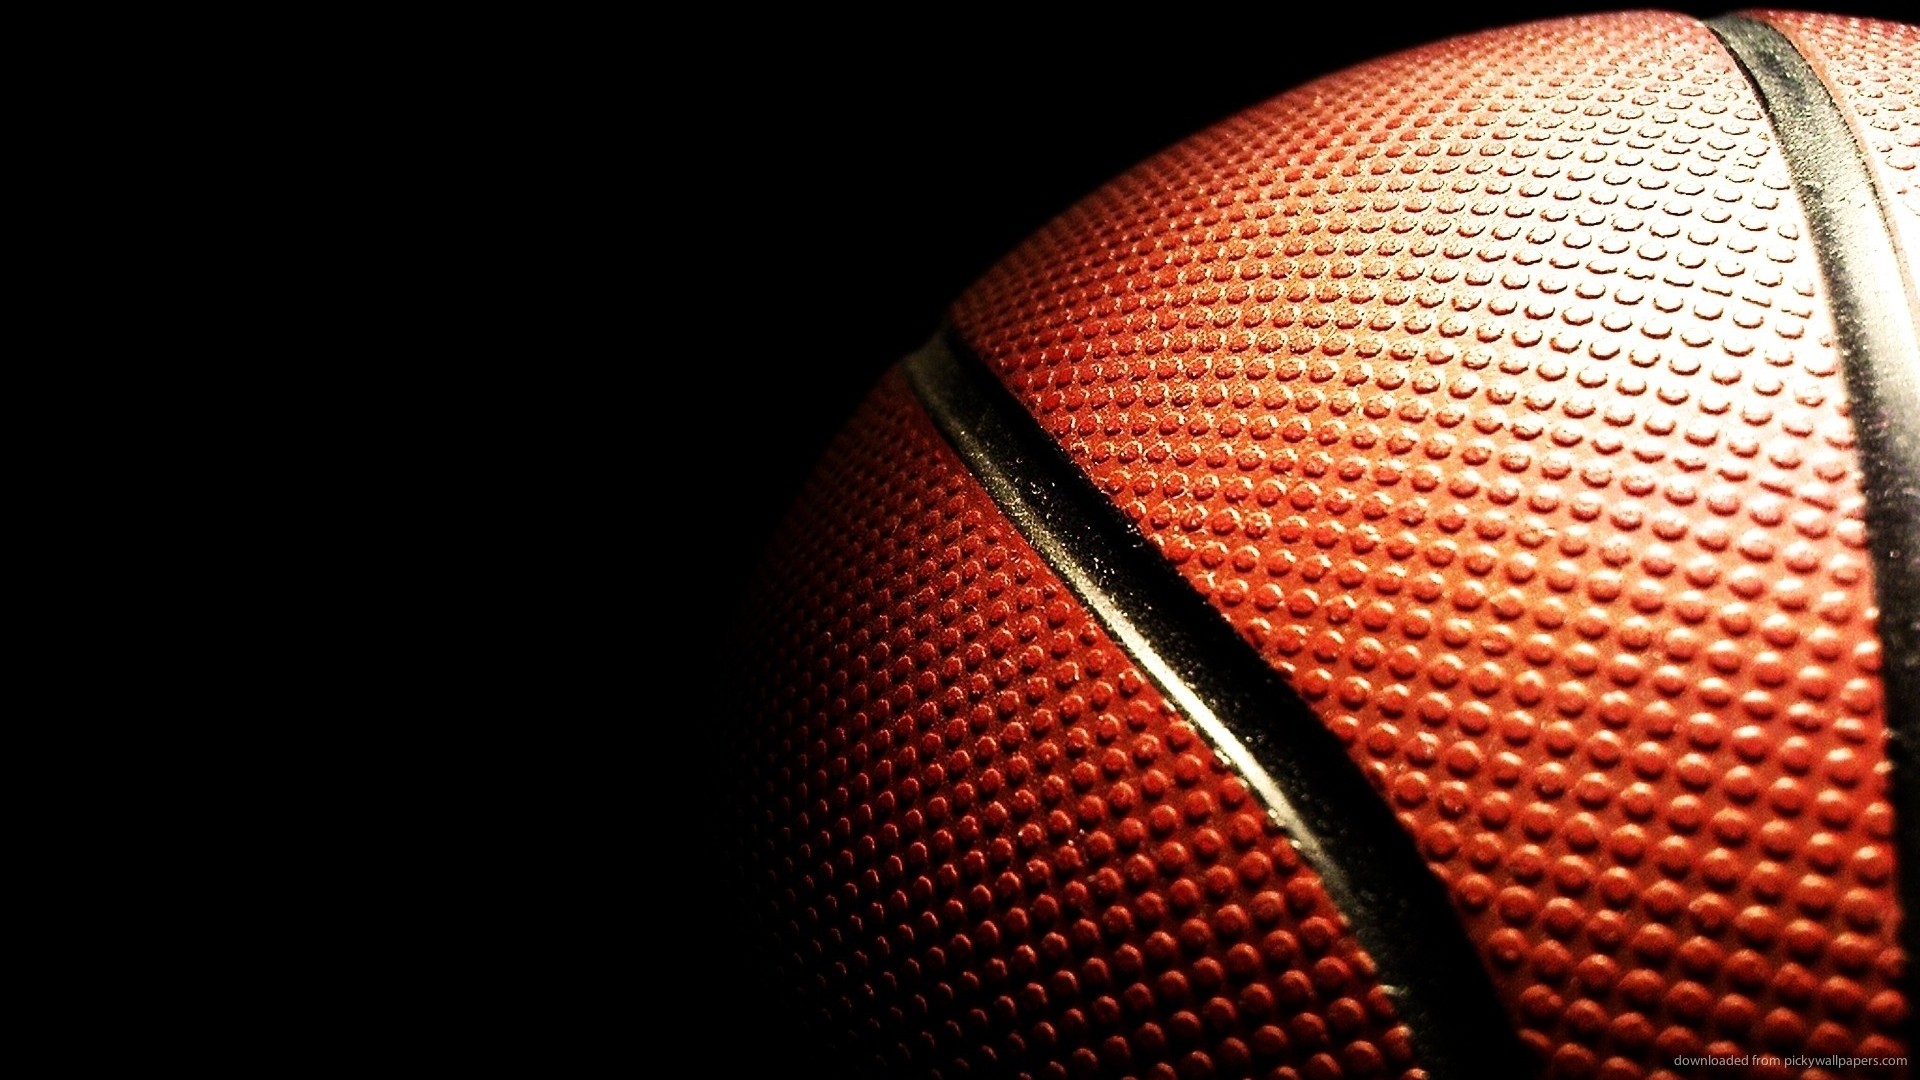 wallpapers hd basketball wallpapers hd basketball wallpapers hd 1920x1080